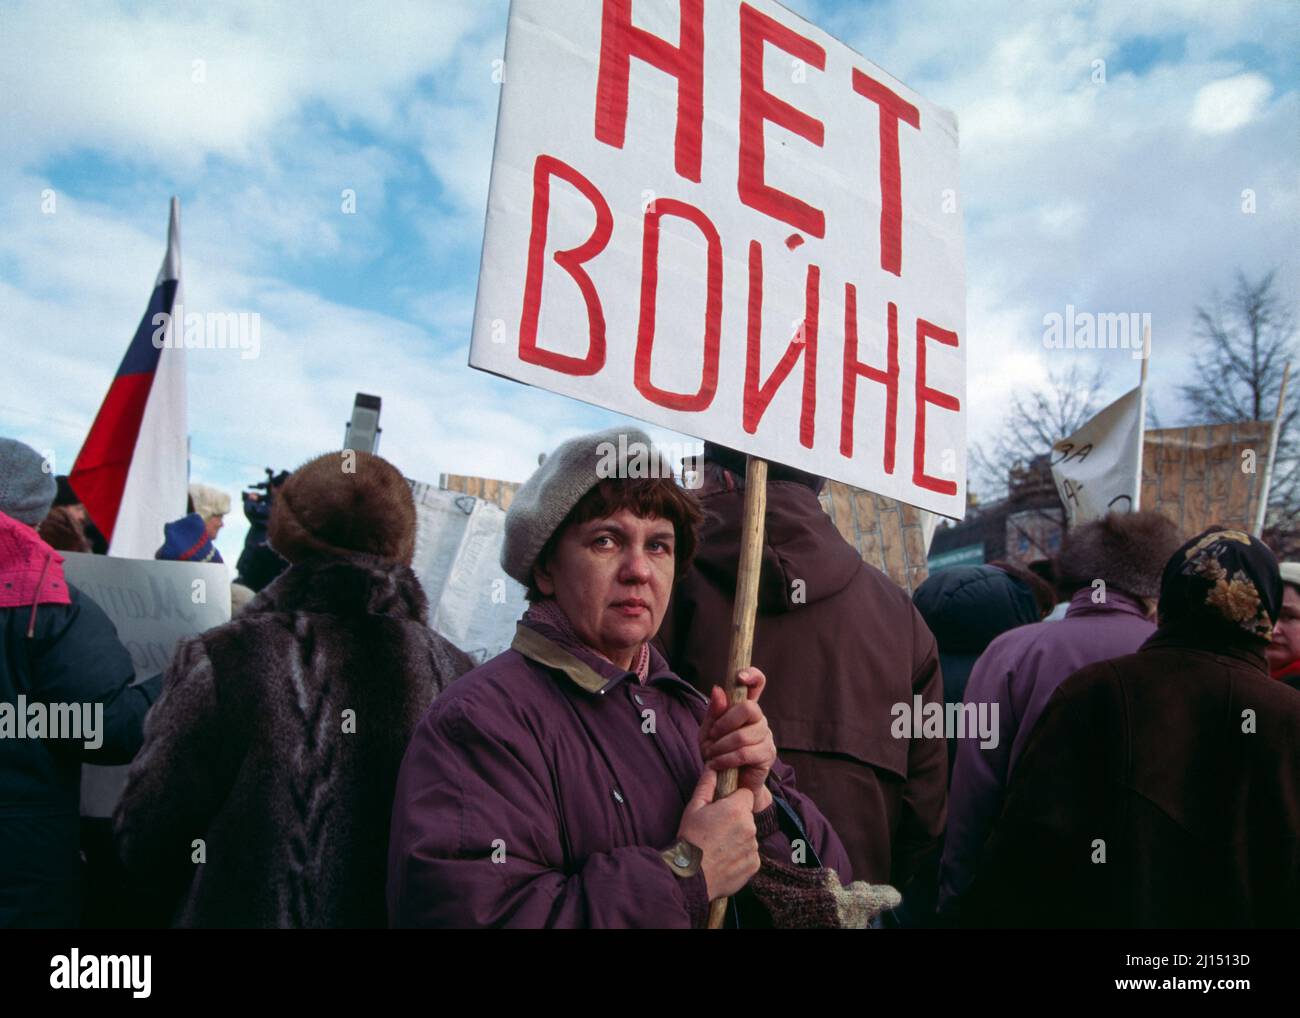 February 1995, Moscow, Russia.  Russian woman during an anti-war demonstration on Pushkin Square in central Moscow.  The demonstration was organized by Memorial and Soldiers’ Mothers in protest of the First Chechen War (1994-1996).  She is holding a poster saying “No War” written in Cyrillic. Stock Photo